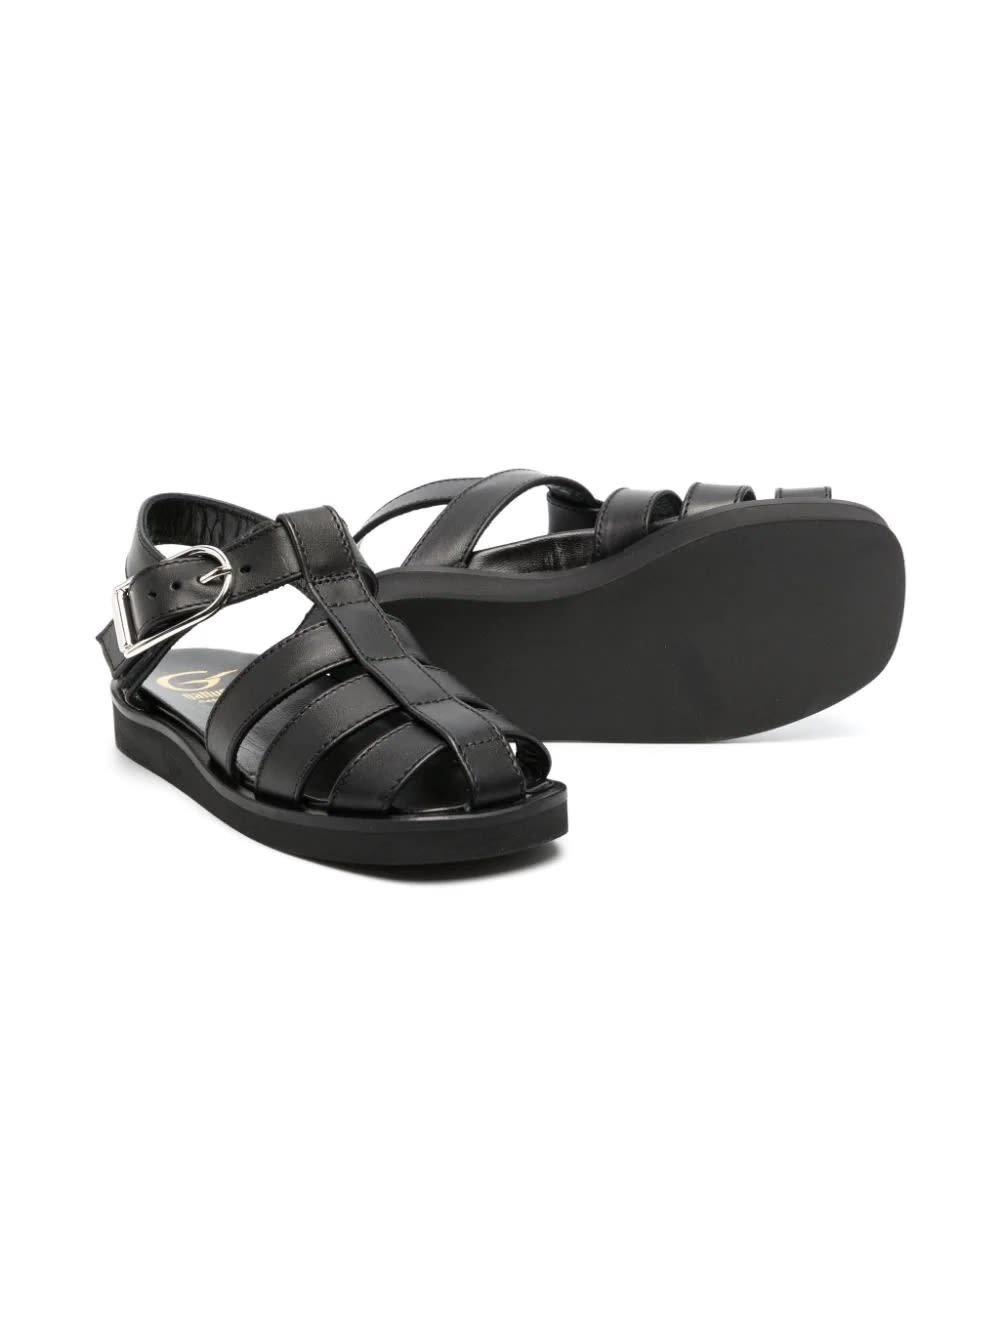 Shop Gallucci Sandals With Buckle In Black